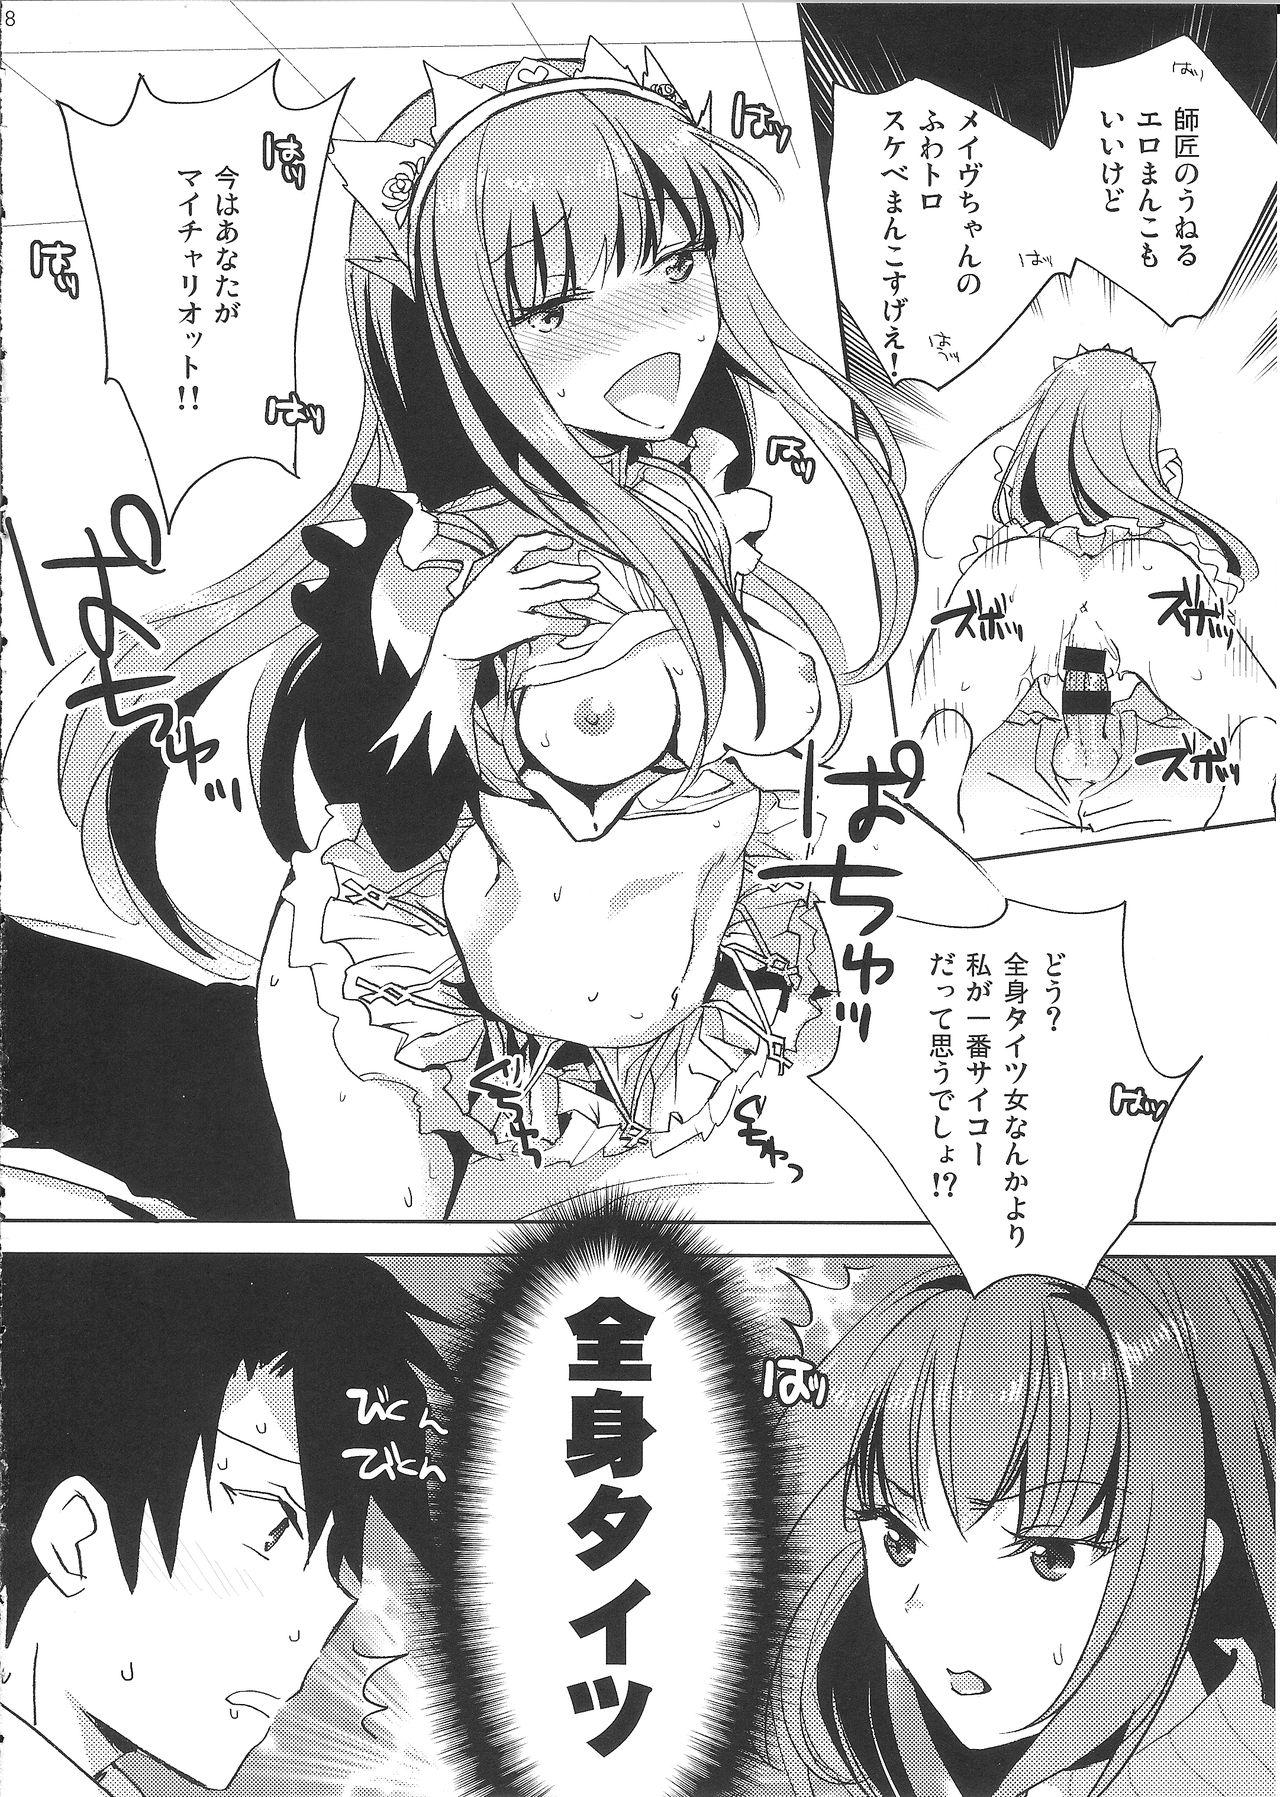 Cumming BLACK EDITION 2 - Fate grand order Hung - Page 6